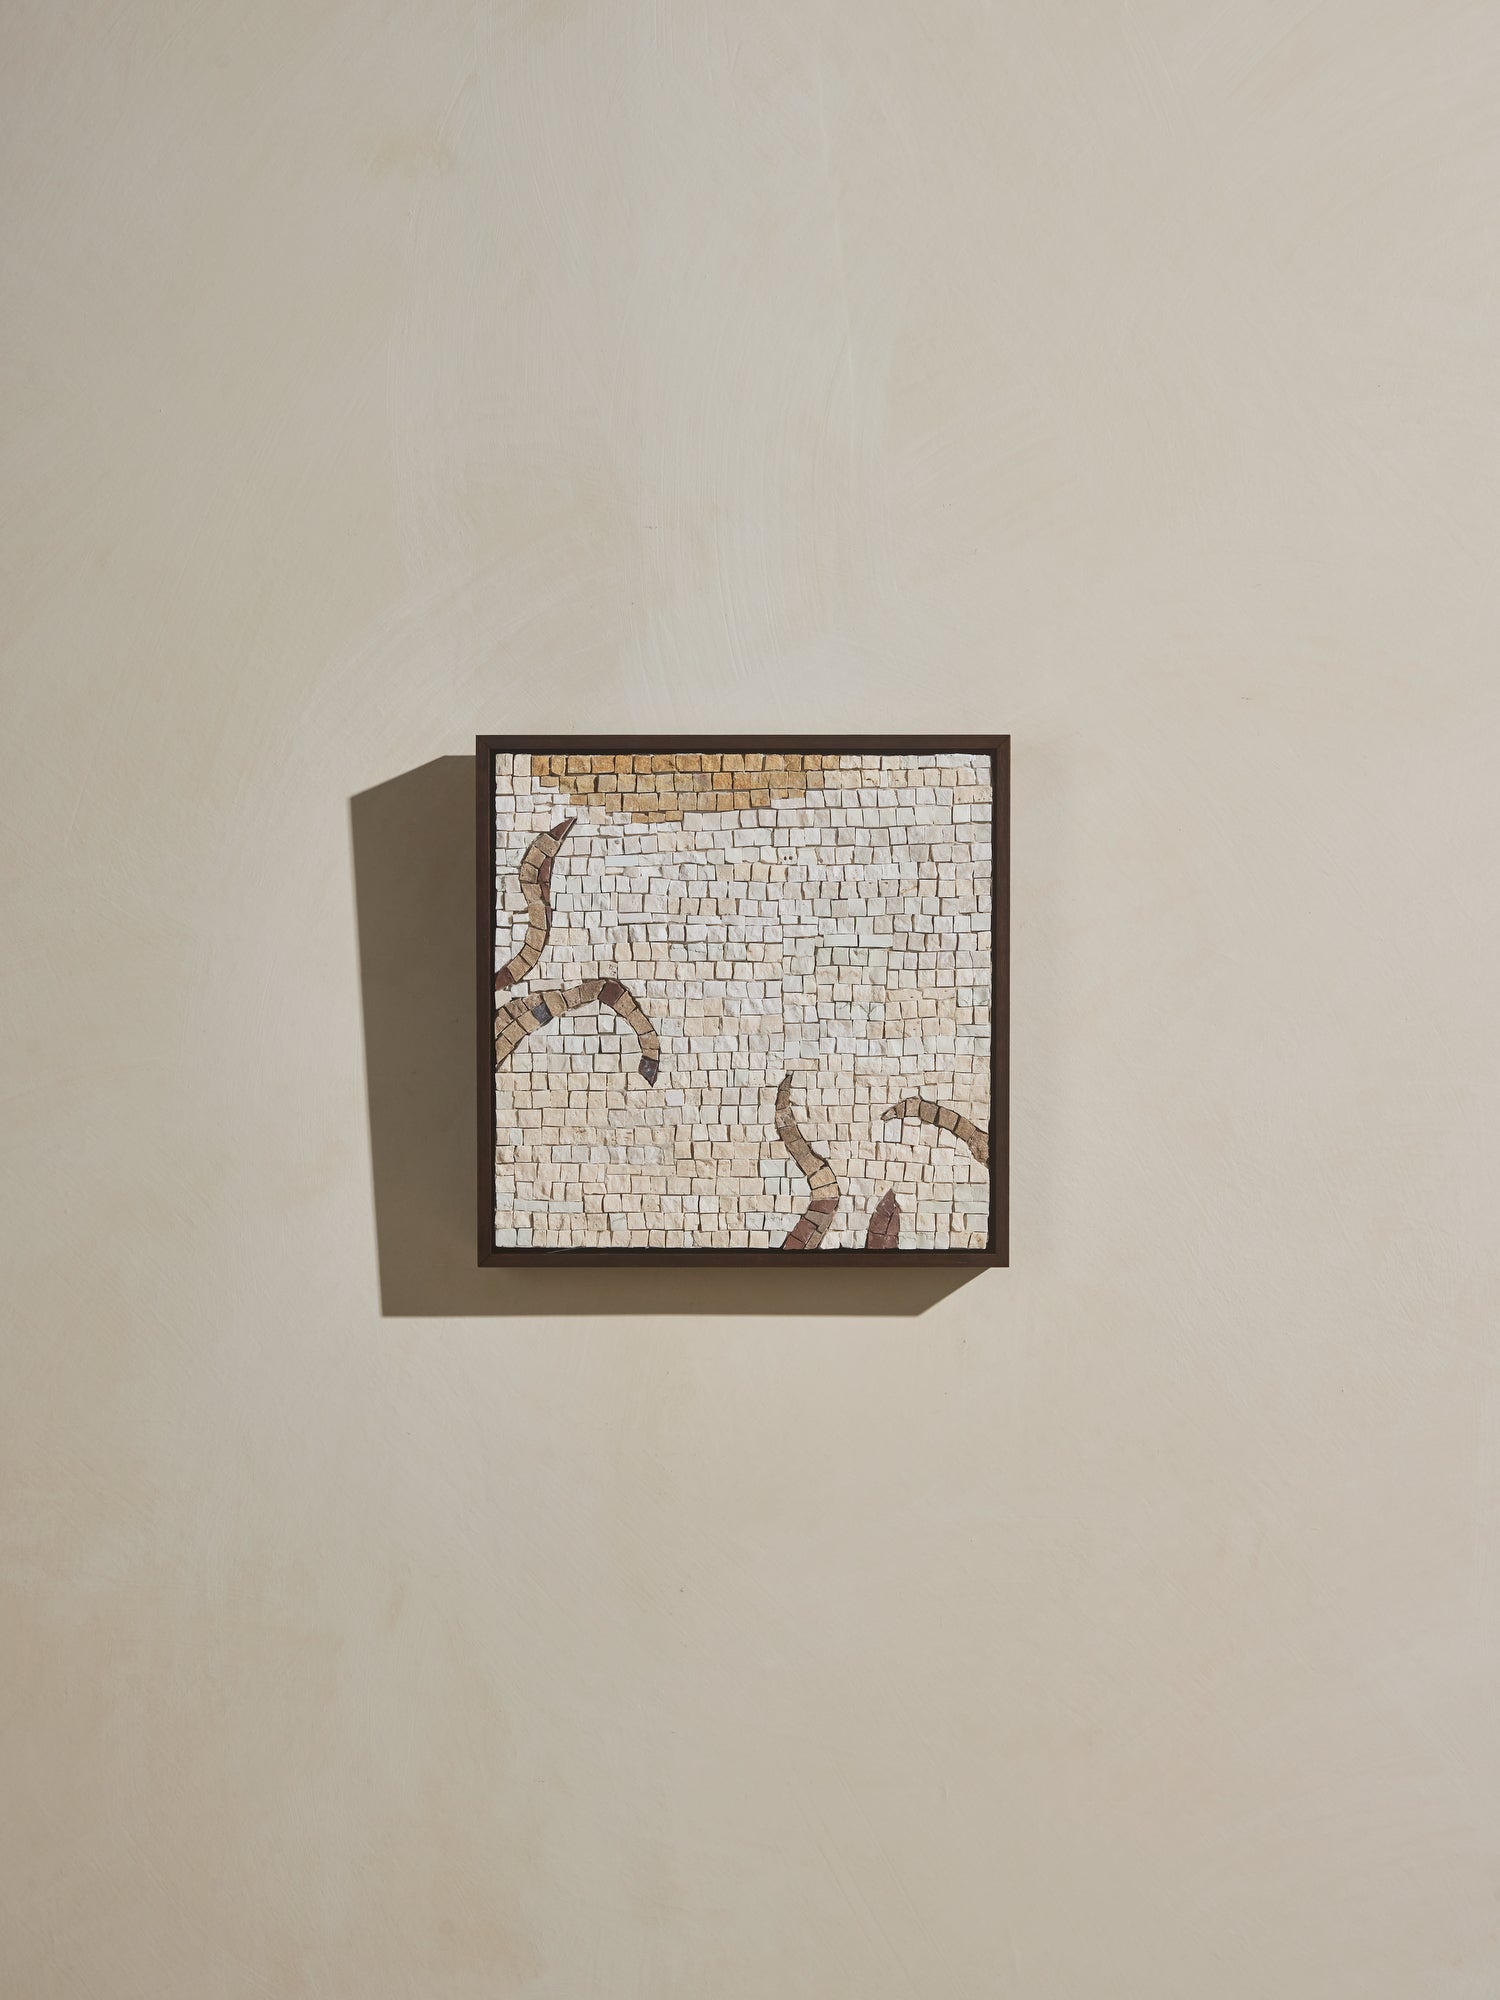 Mosaic square stone art piece with yellow, off white and beige details and wooden framing.